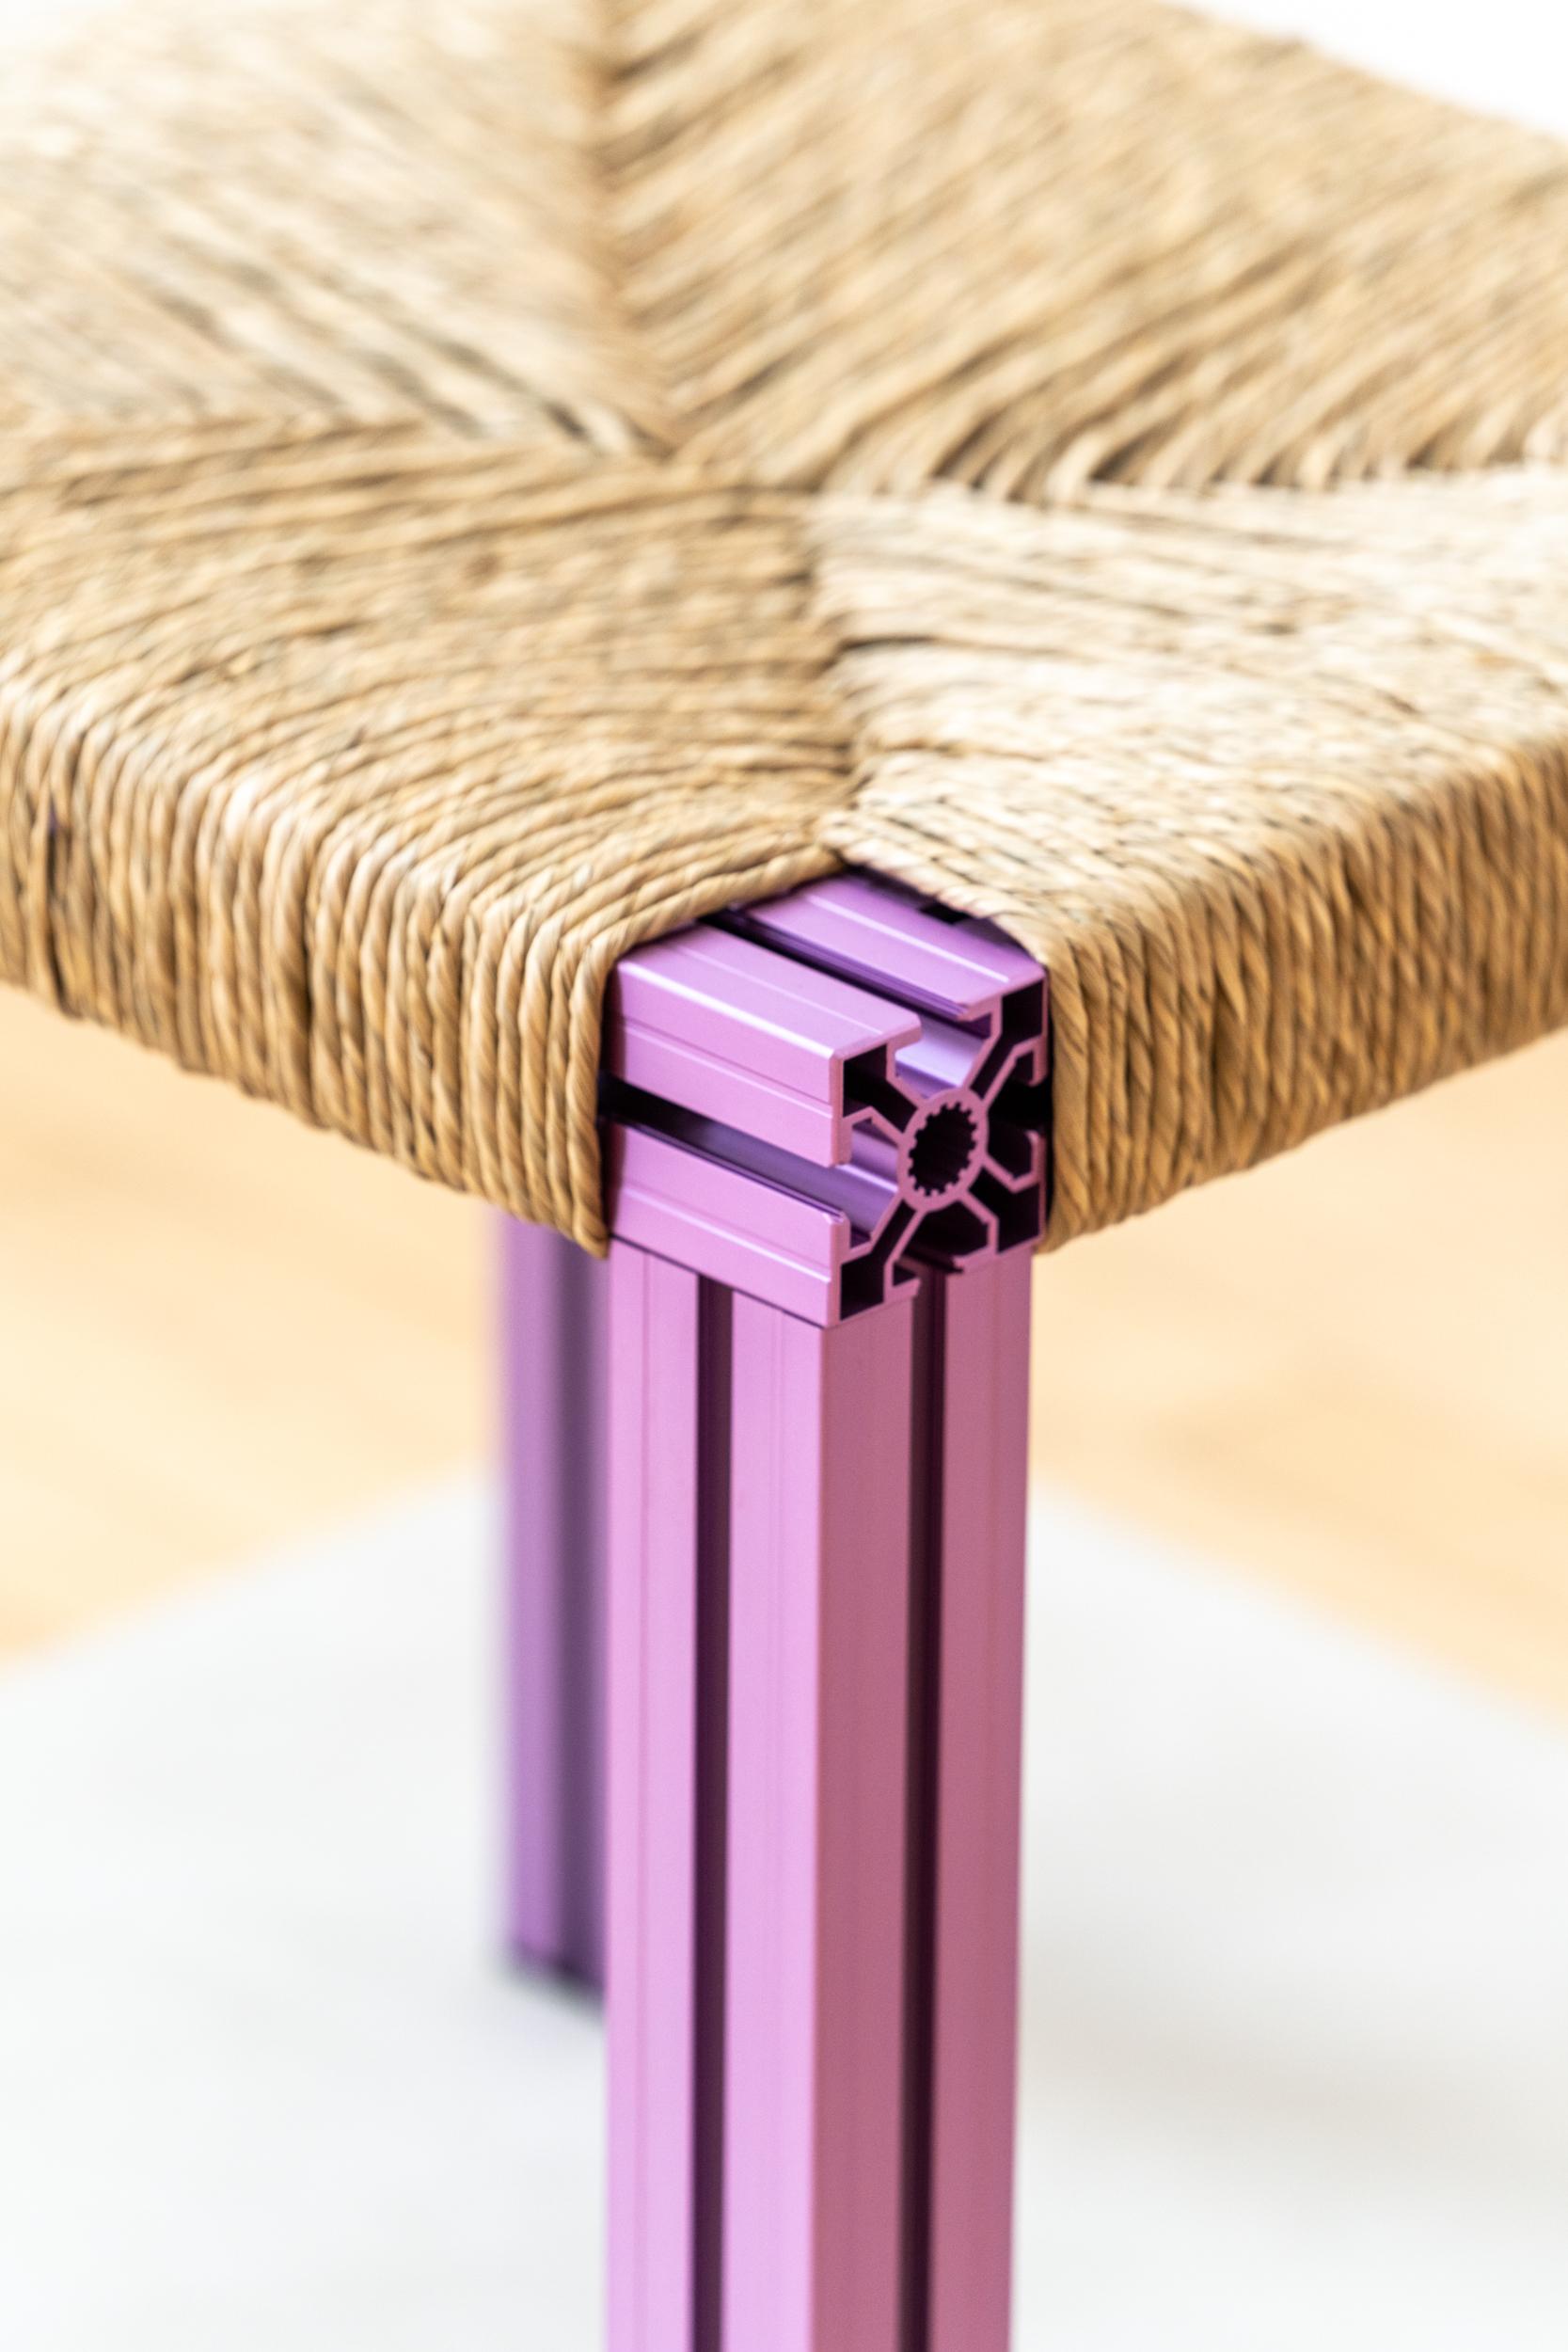 Anodized Purple and Rush Weave Wicker Stool by Tino Seubert For Sale 3